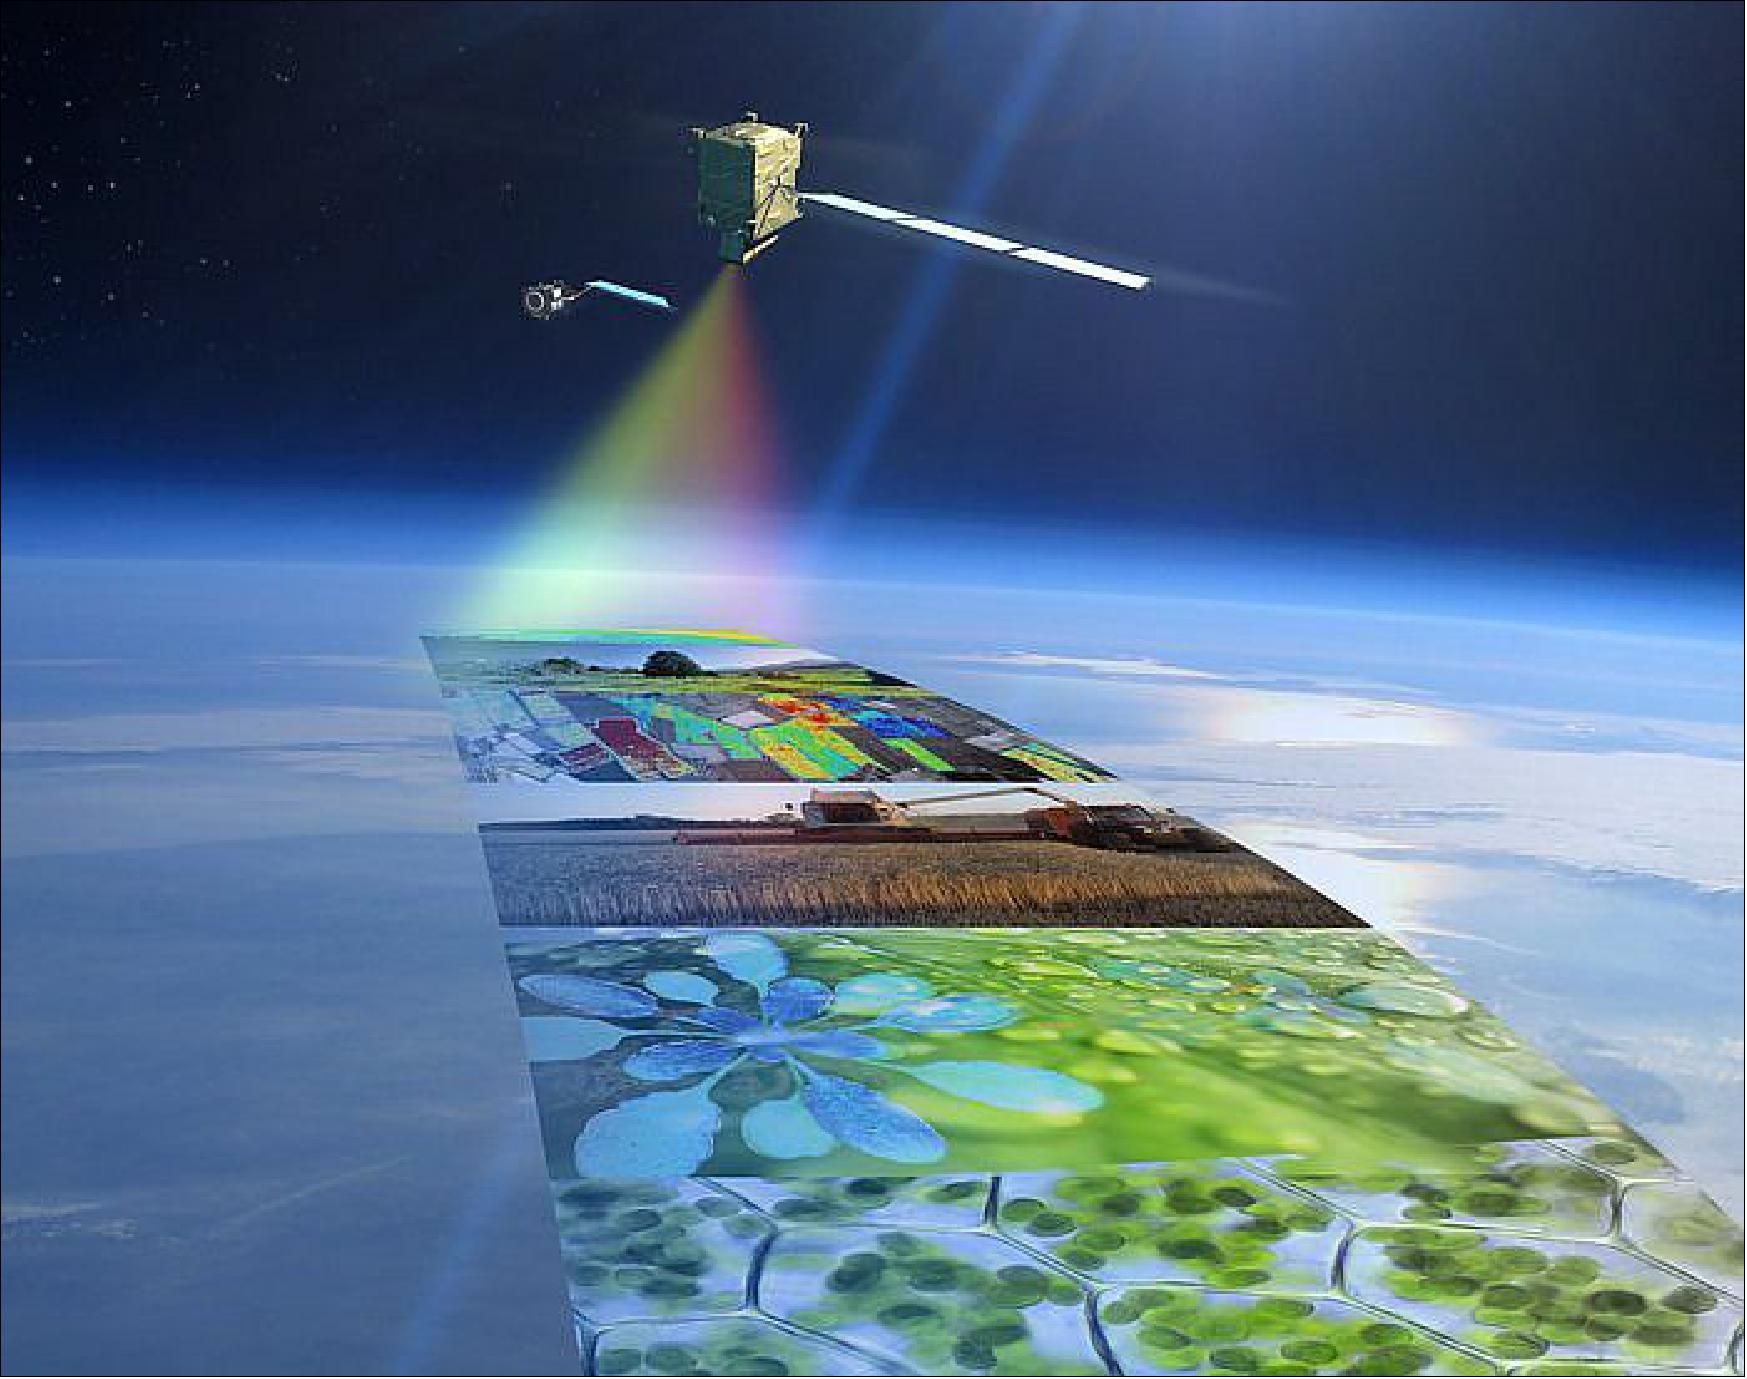 Figure 1: Artist’s concept of the FLEX satellite, in formation with a Sentinel satellite in the background, measuring plant fluorescence from orbit (image credit:: ESA, ATG medialab)